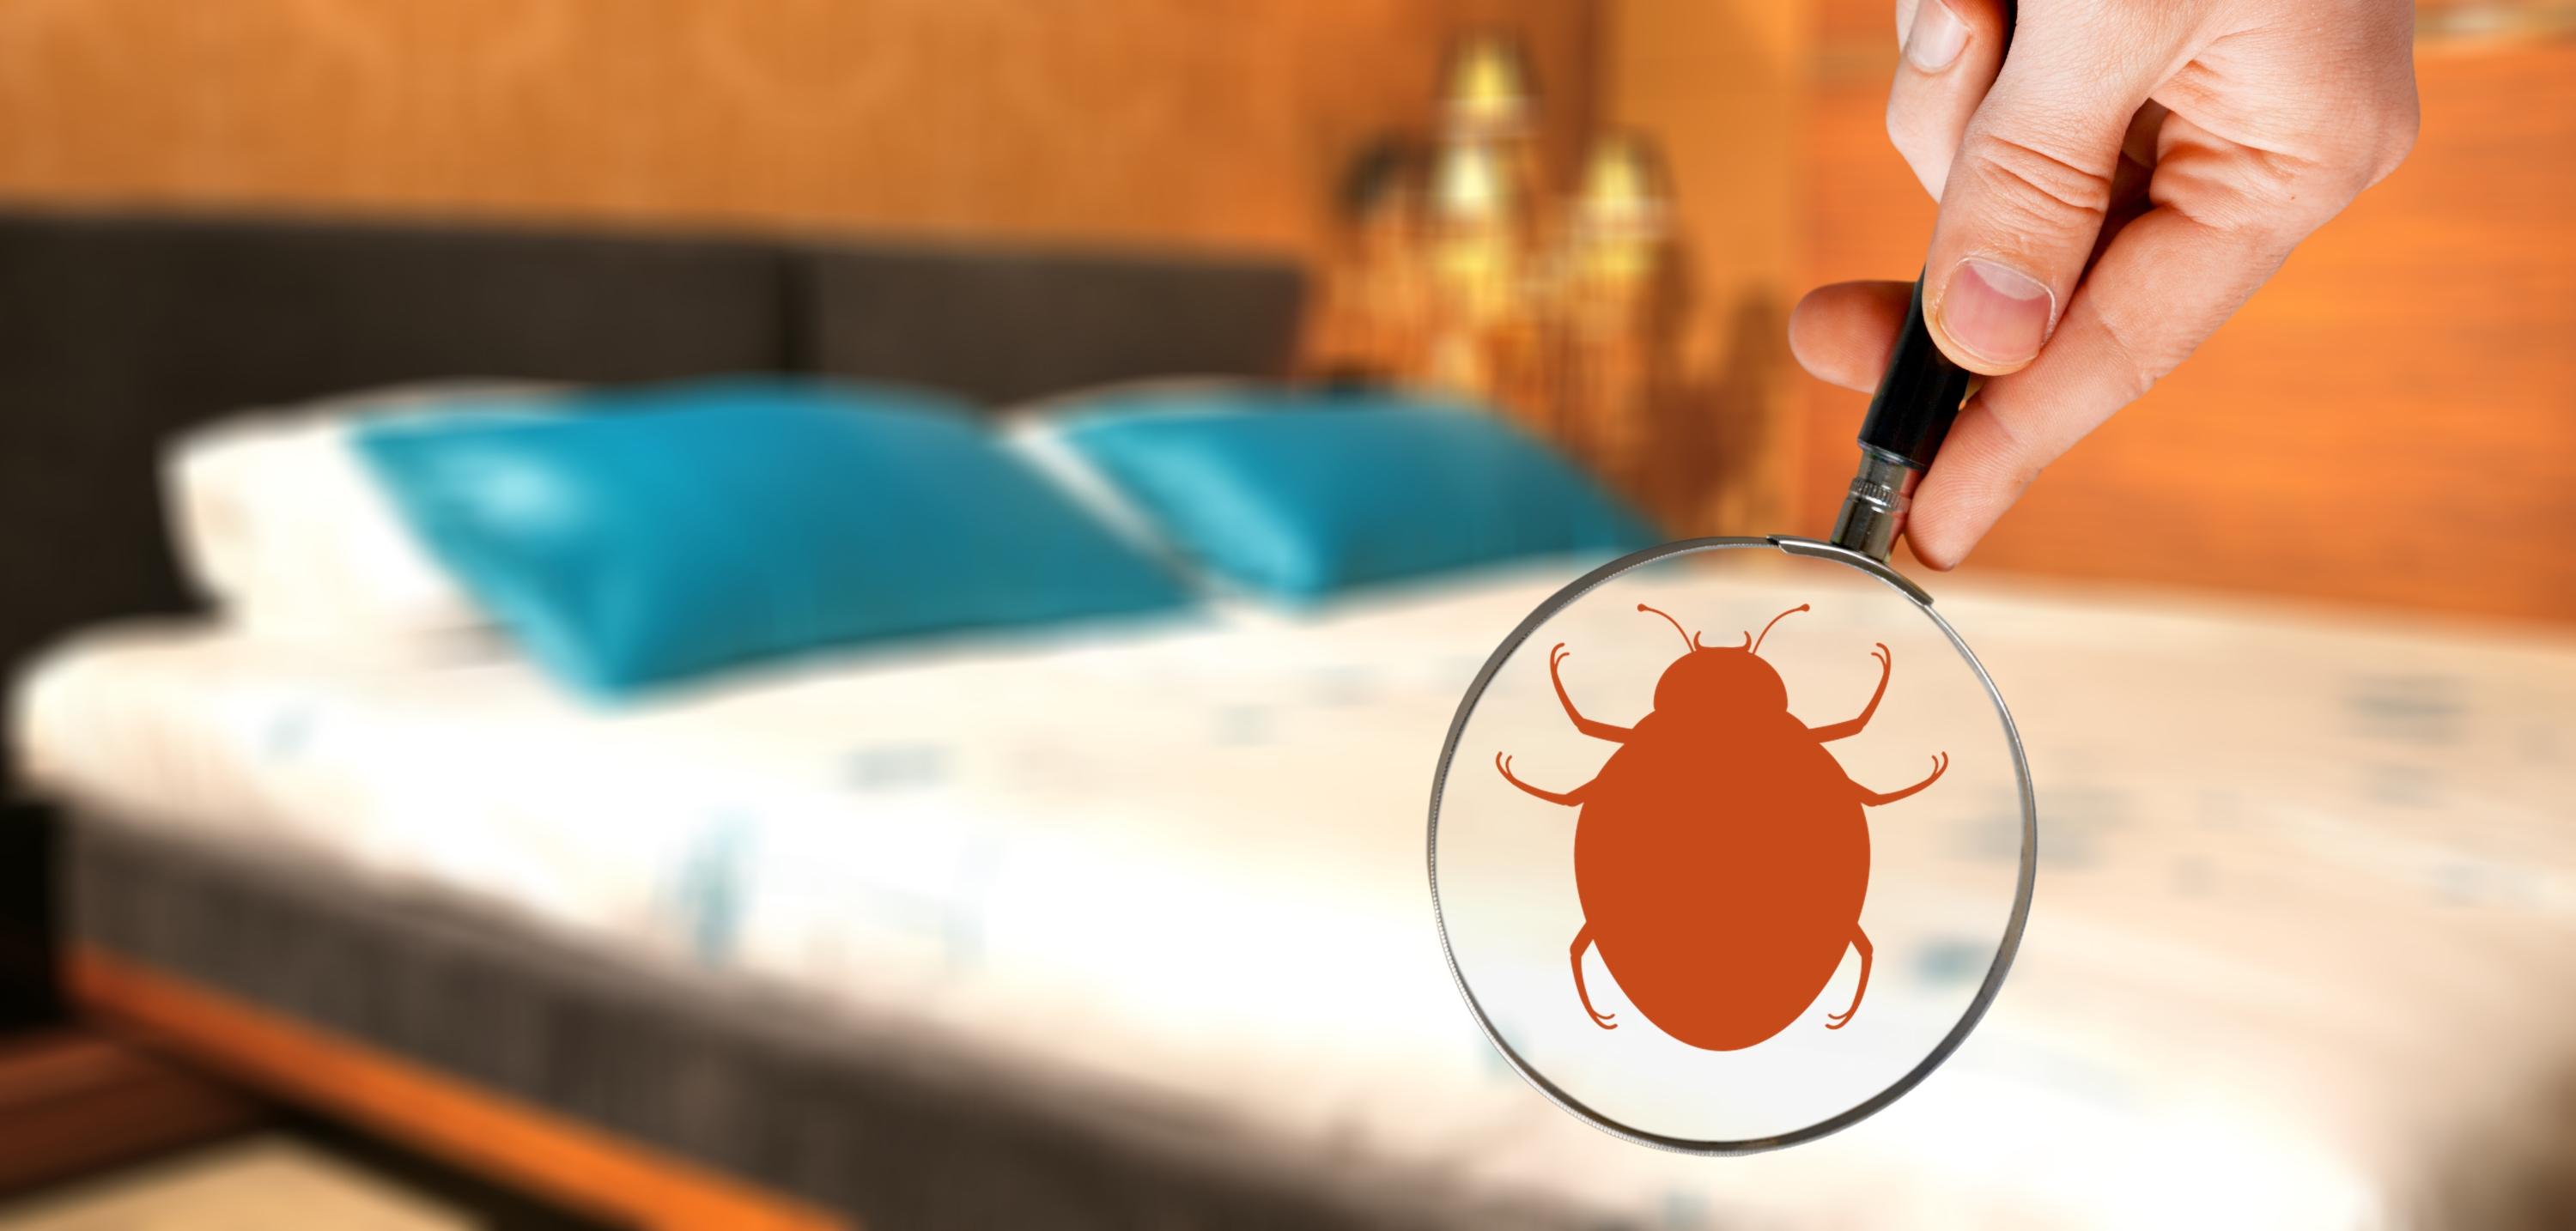 finding bed bugs - Bed Bugs Pest Control Portsmouth, Southampton, Basingstoke And Hampshire